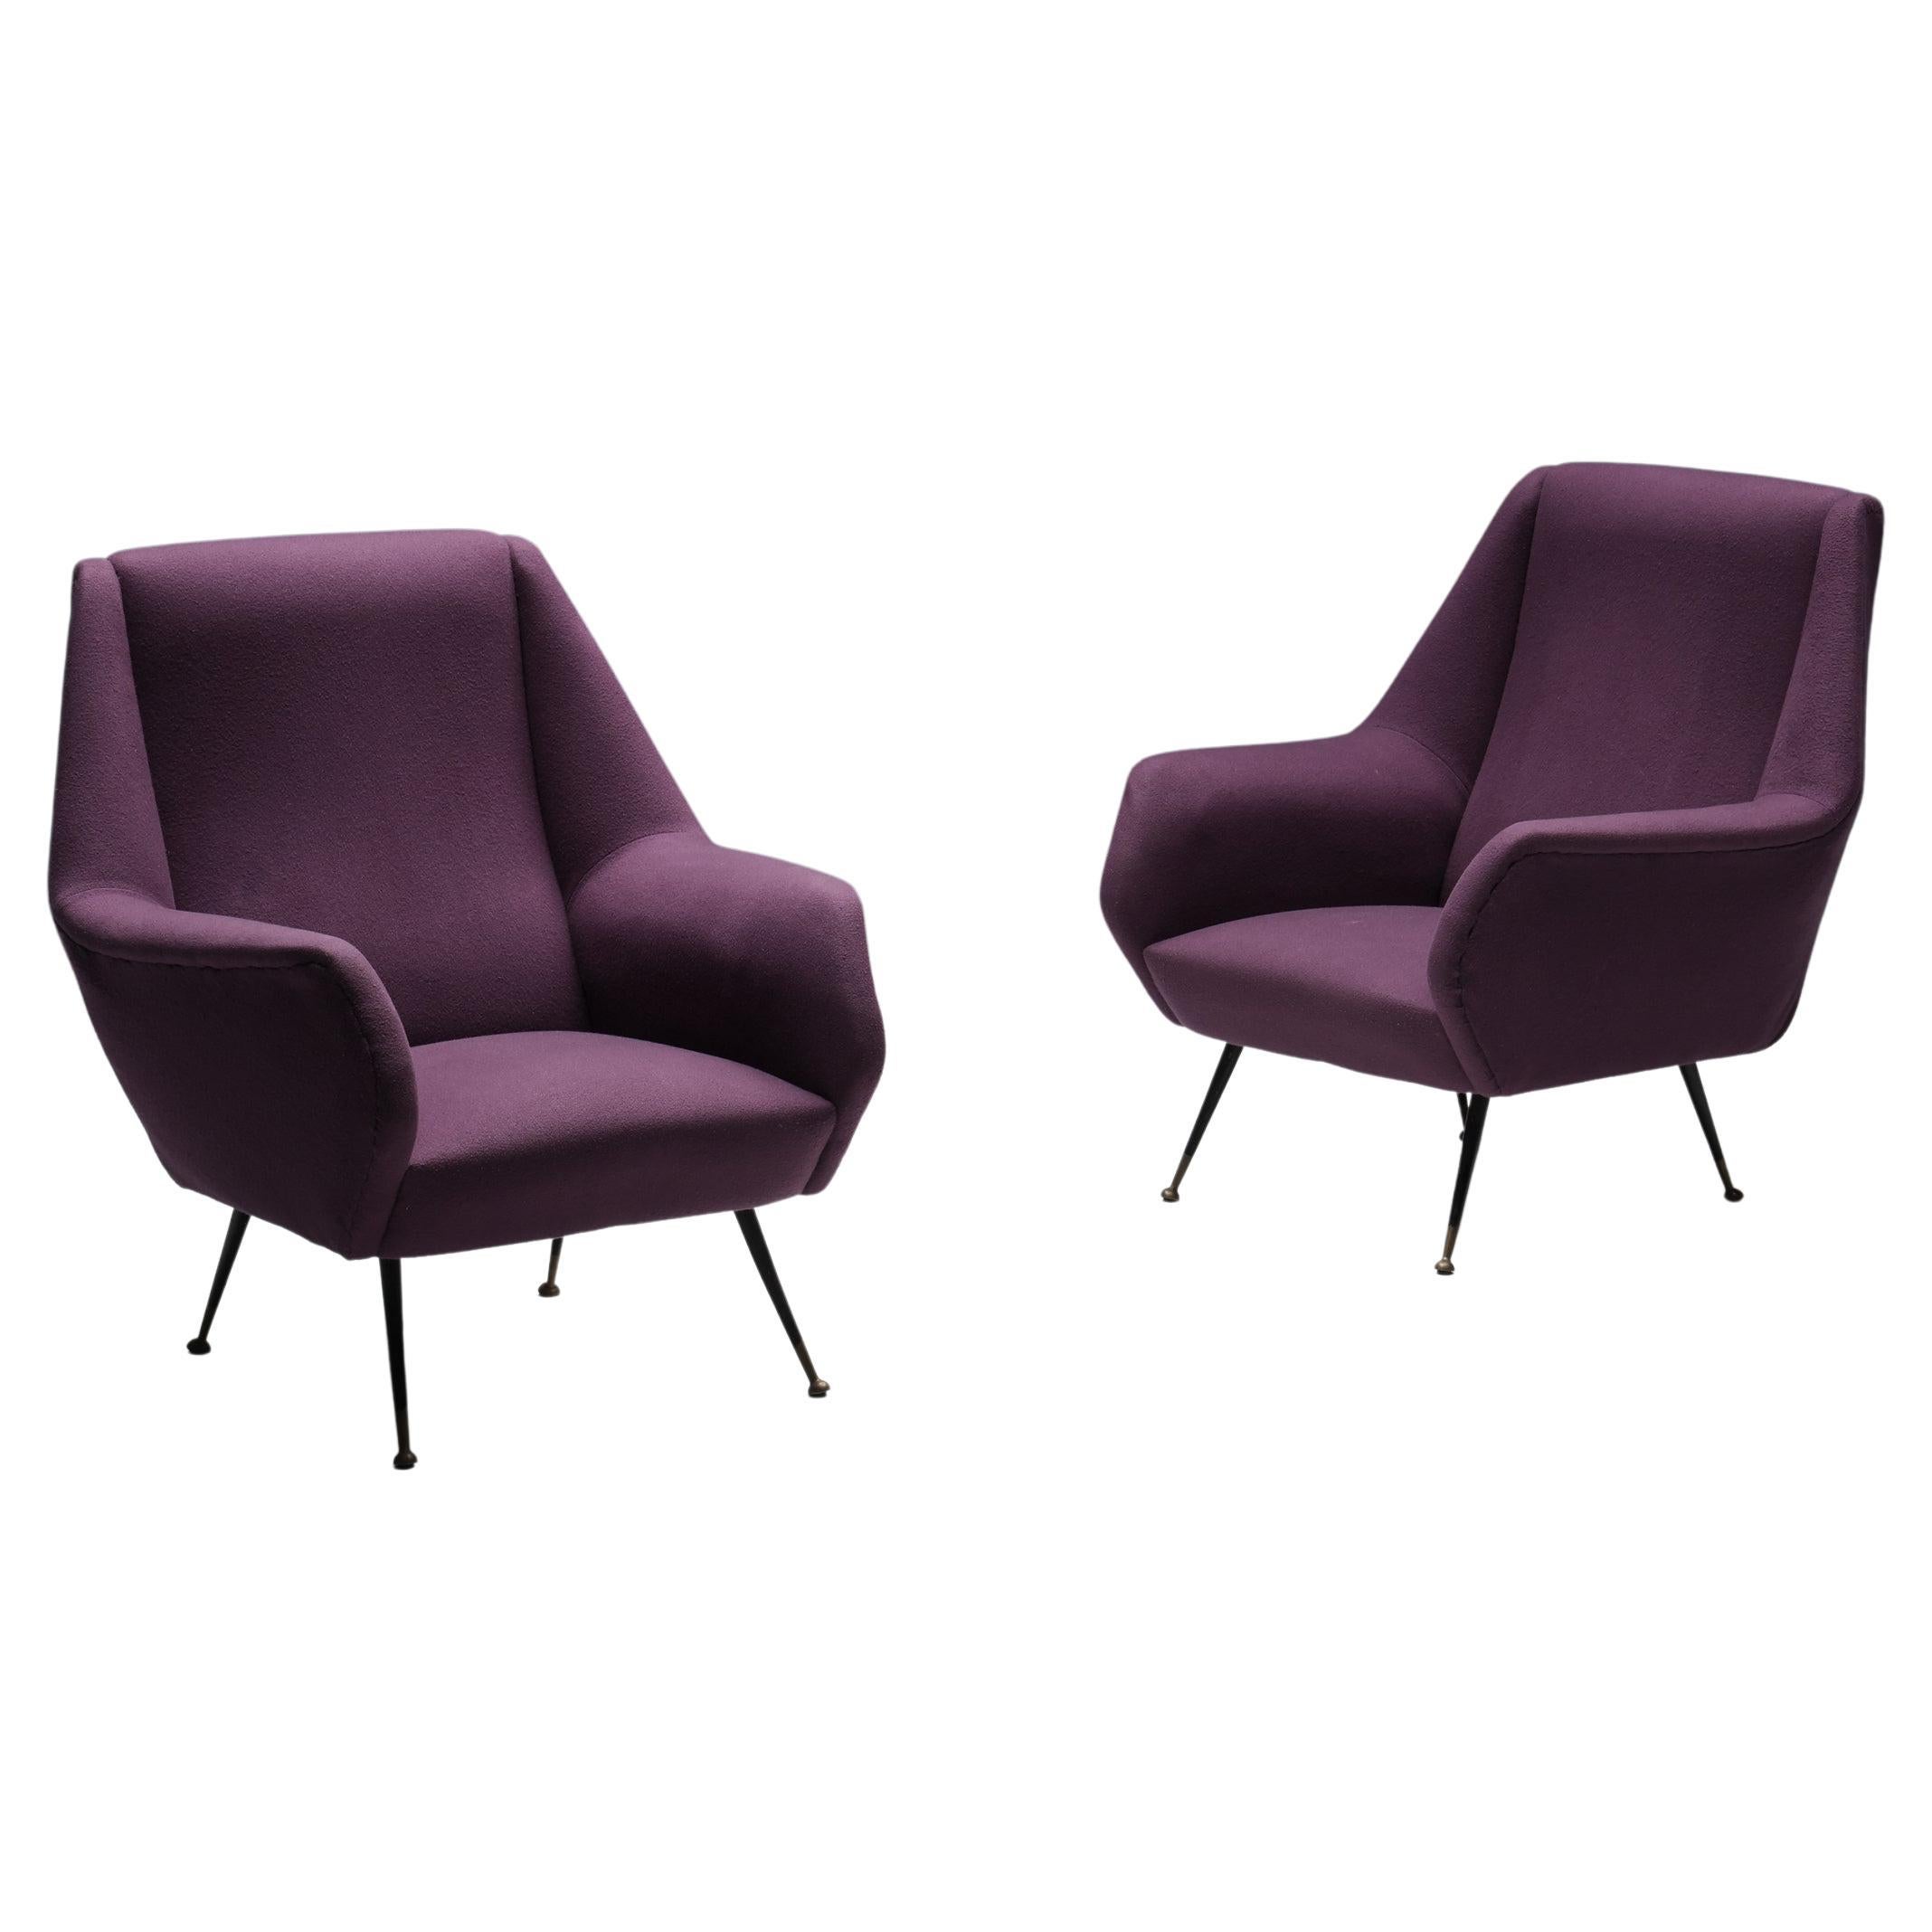 Ico Parisi Easy Chairs with Purple Upholstery, 1950s